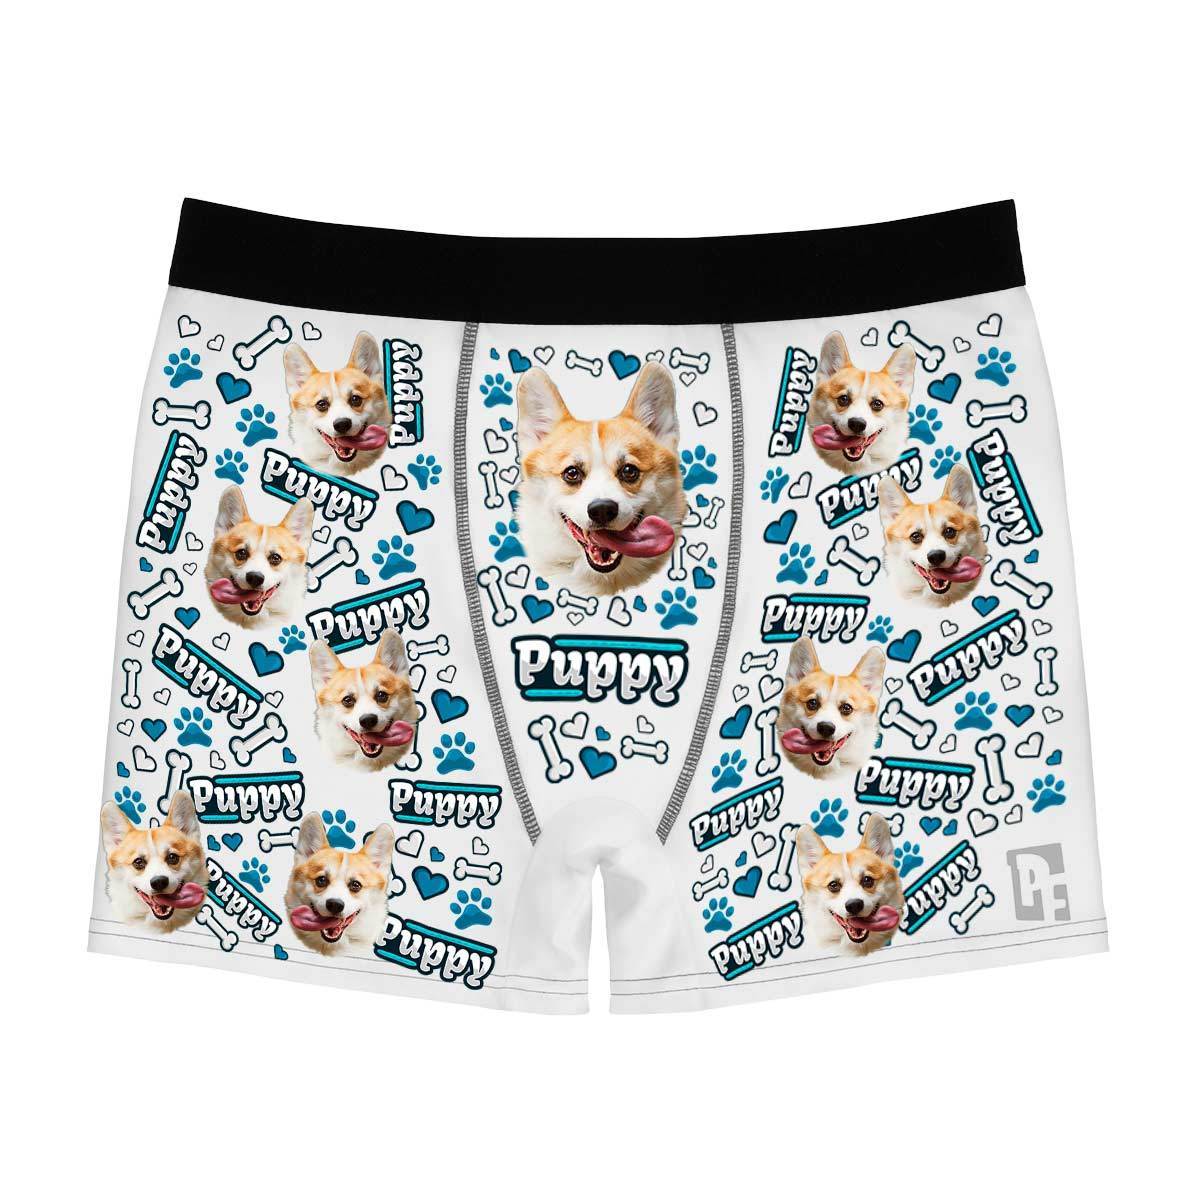 White Puppy men's boxer briefs personalized with photo printed on them